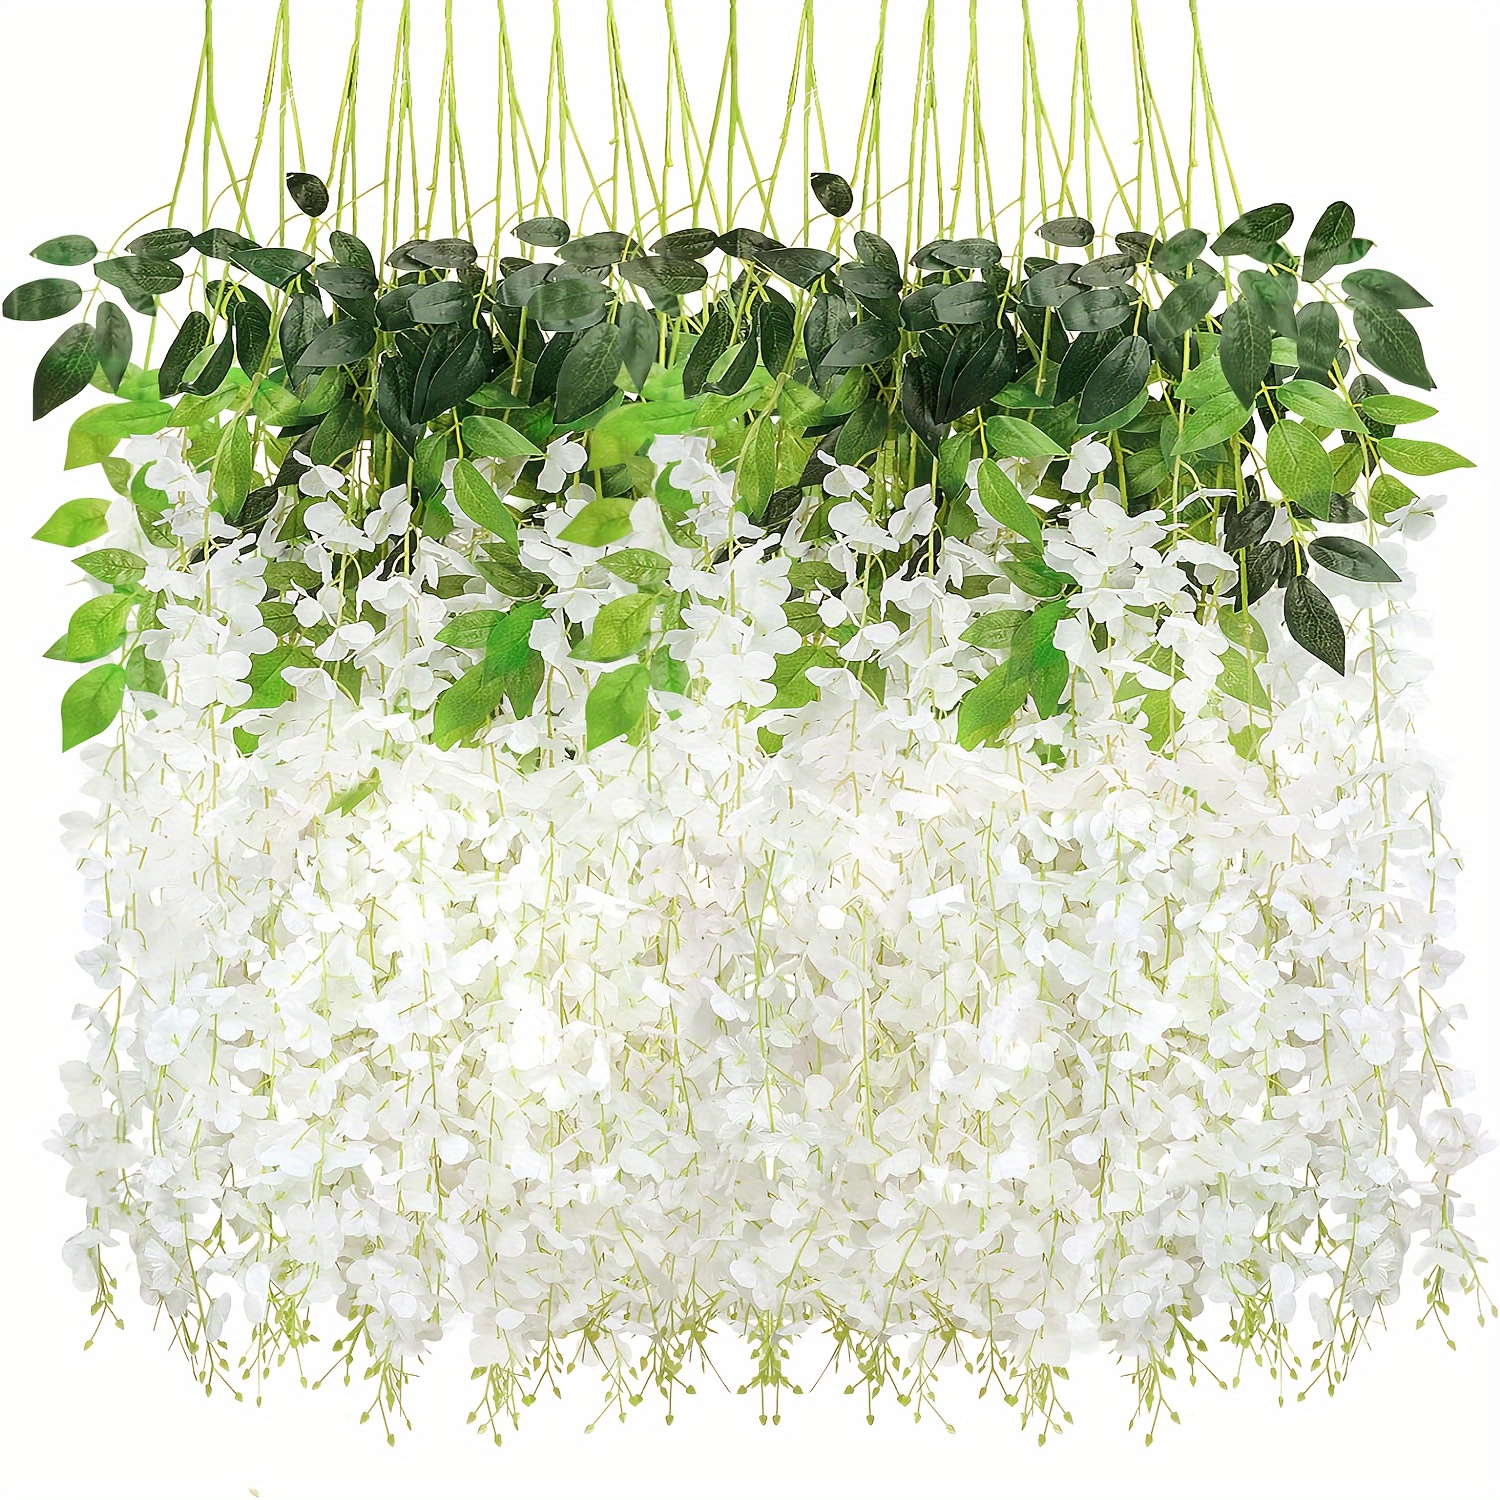 

12pcs Artificial Wisteria Hanging Flowers, Wisteria Artificial Flower Fake Wisteria Vine Ratta Long Hanging Bush Garland Silk Flowers String Decorate Home Party Wedding Decor